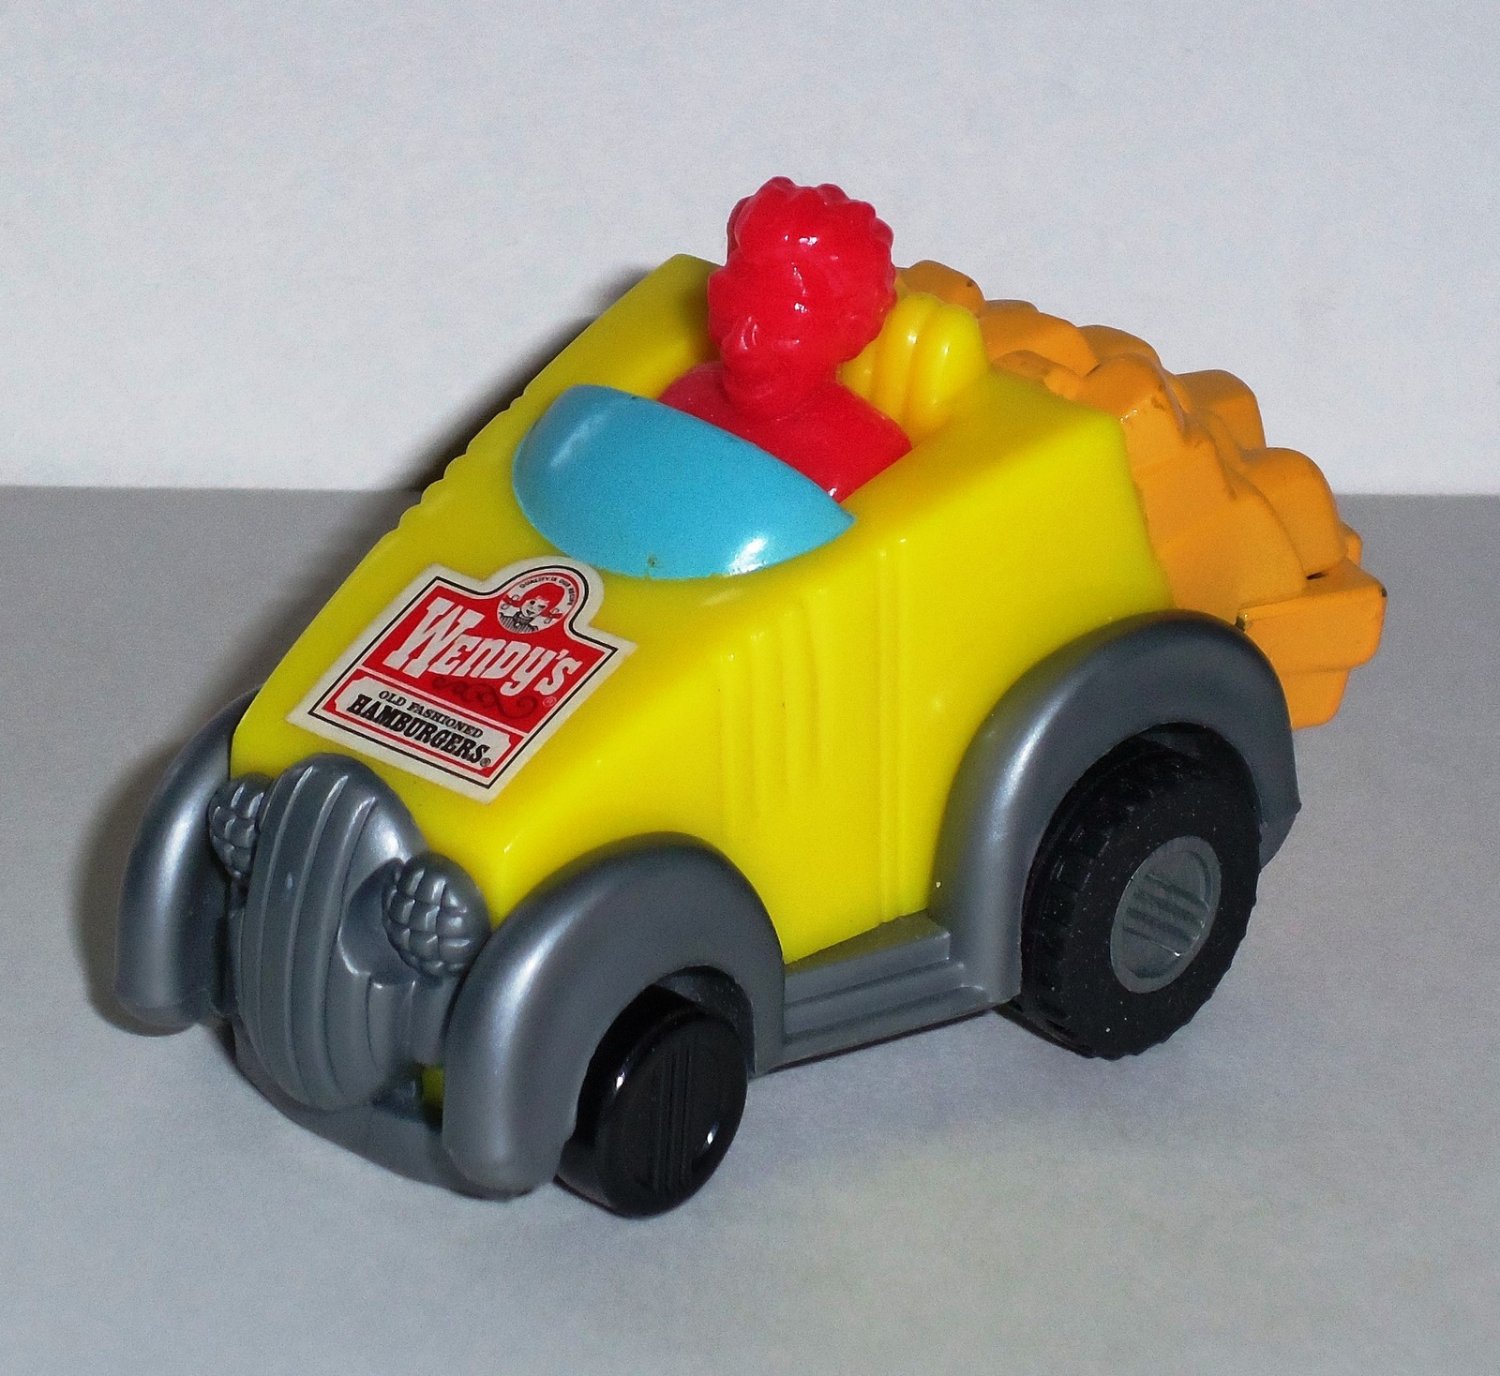 Details about   Wendy's 1998 ON WHEELS Food Car FROSTY Burger Fries Vehicle YOUR Toy CHOICE 